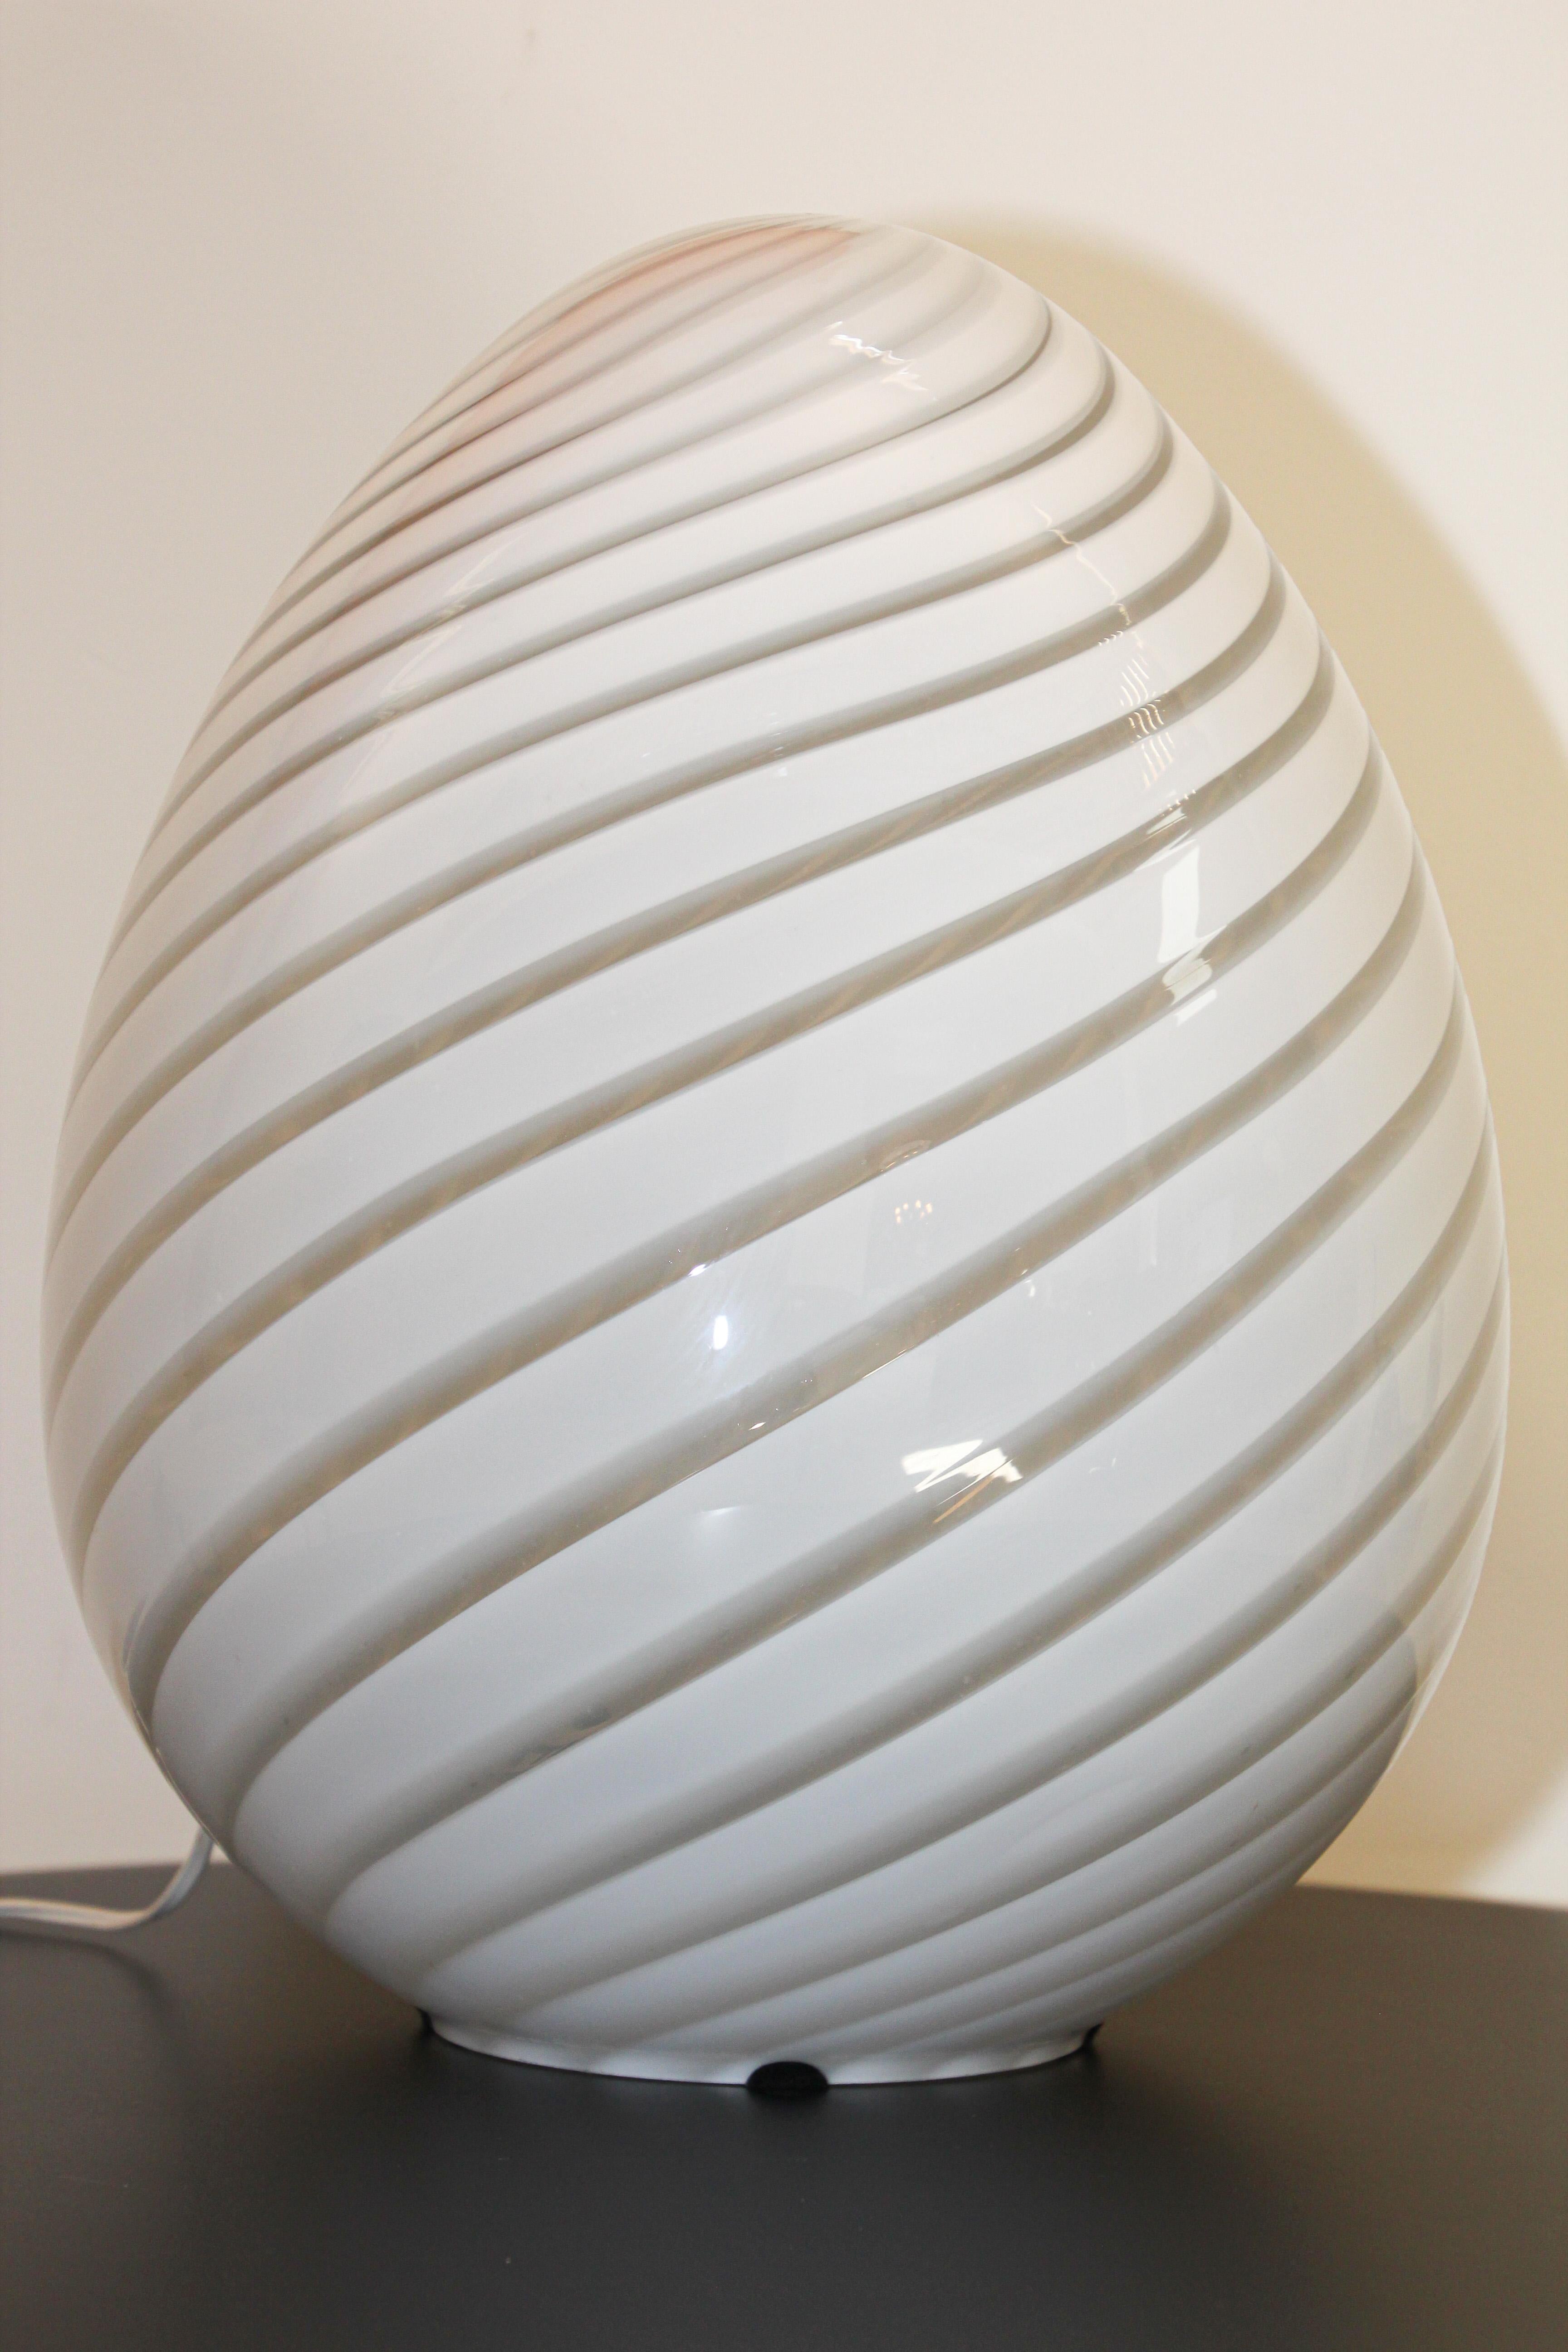 Stunning large swirled glass lamp by Vetri murano egg lamp.
Amazing large scale Modern Egg-shaped white Murano glass table lamp light by Fulvio Bianconi for Venini in the sensual shape of an egg having the classic swirl pattern lines in the glass.